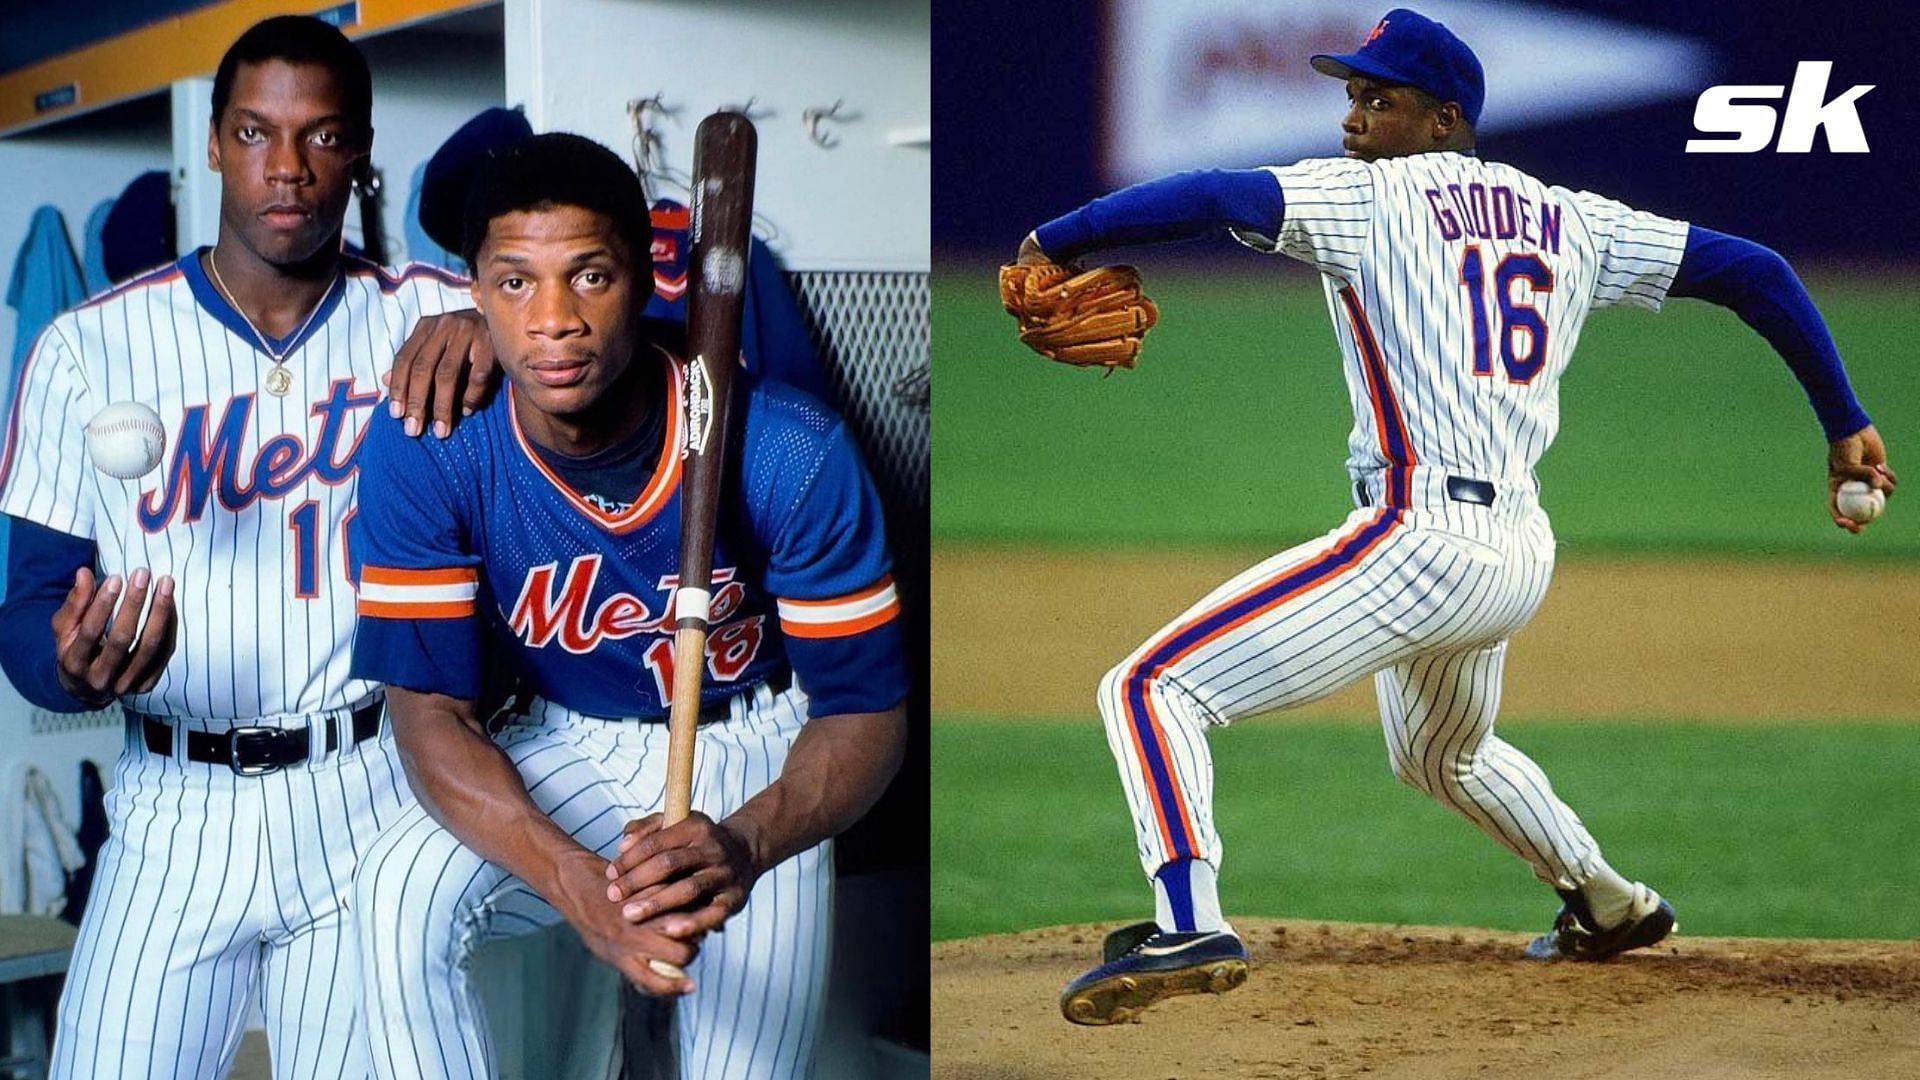 Dwight Gooden and Darryl Strawberry will have their jersey numbers retired by the New York Mets this season